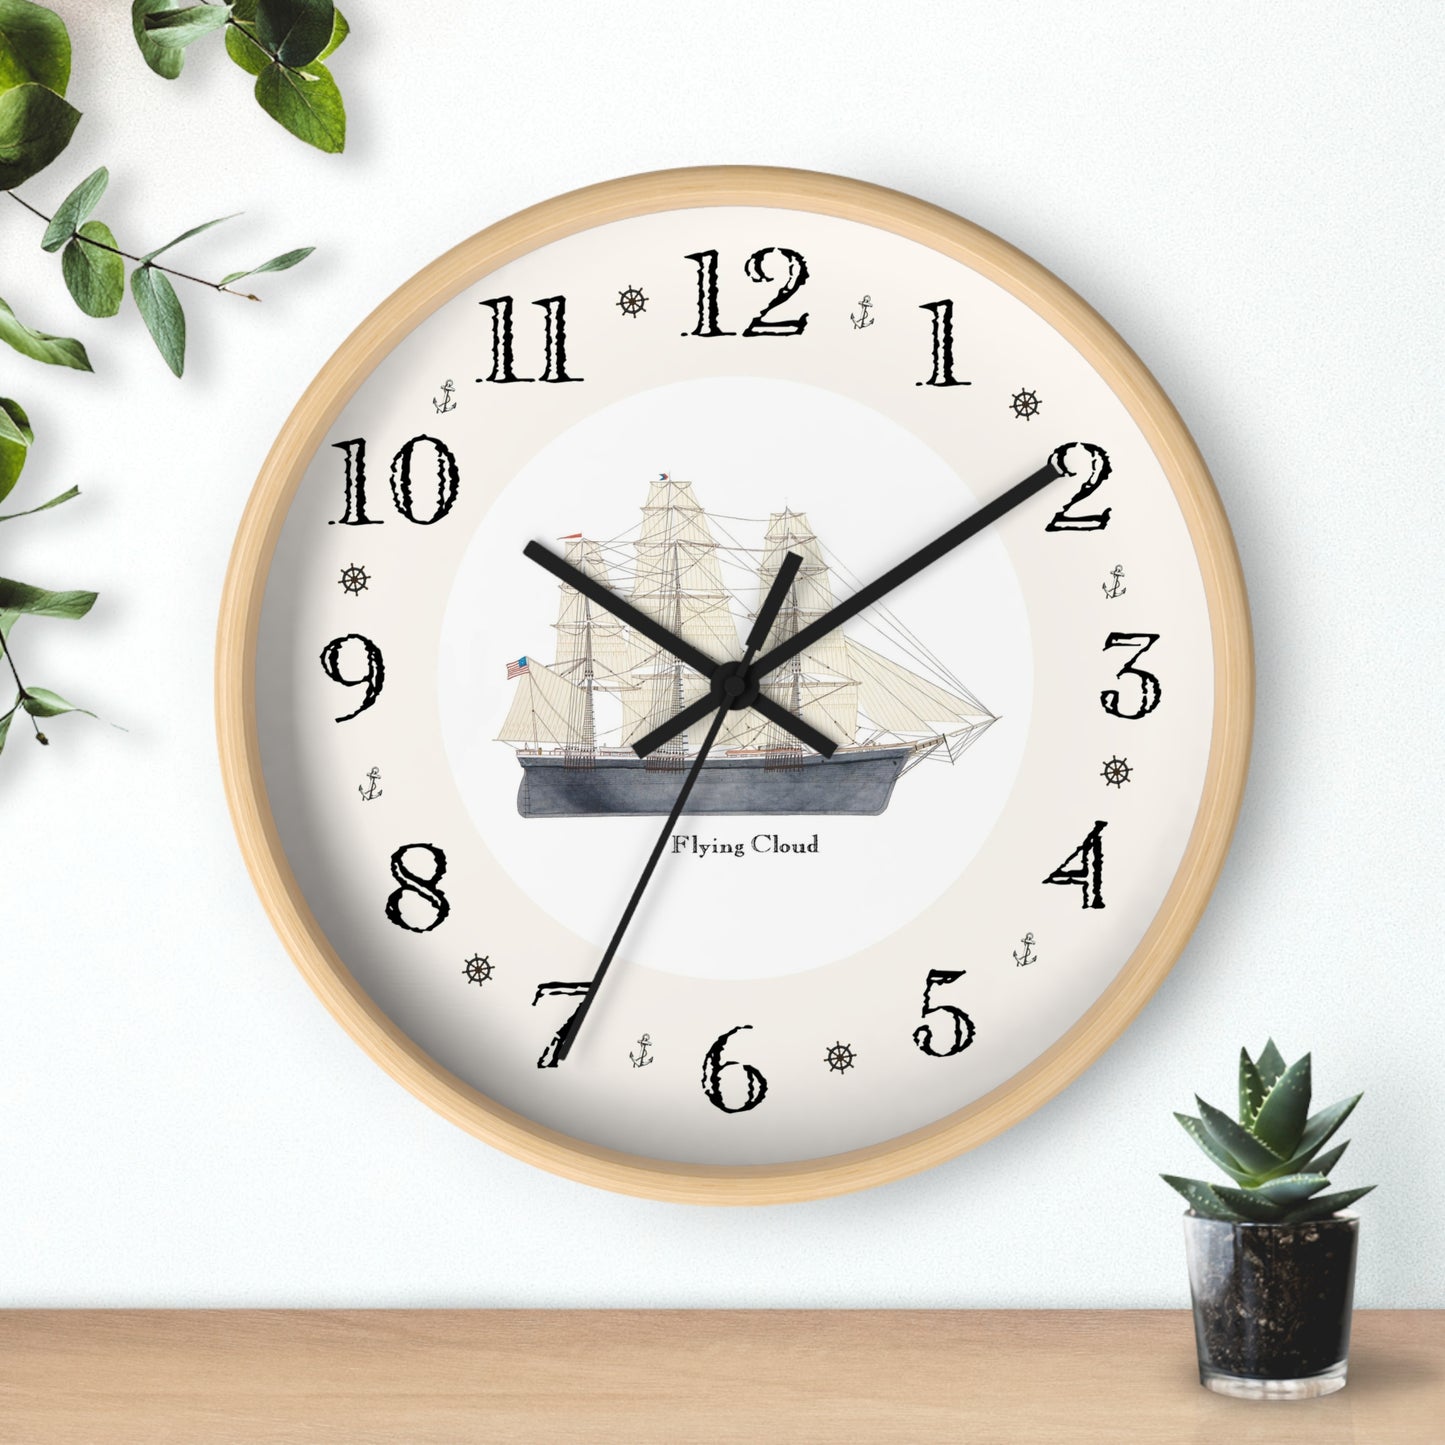 The Clipper Flying Cloud Heirloom Designer Clock features hand-drawn nautical designs between the numbers on the clock. Hang this wall clock  in any room for a unique decorator touch. It makes a great gift for anyone who loves sailing or naval history.